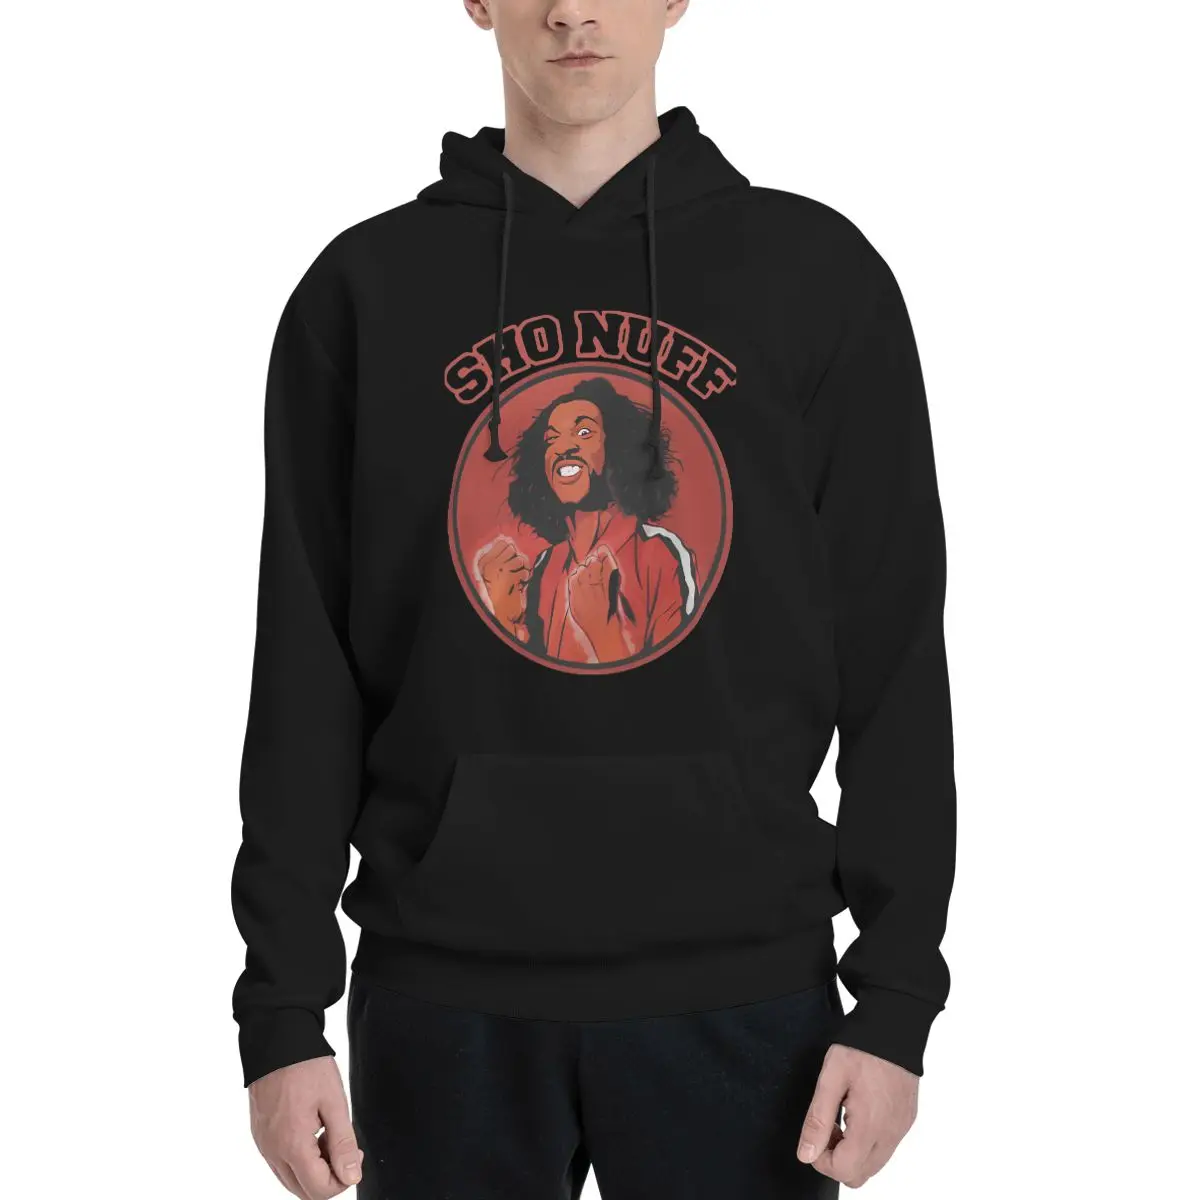 

Regular Fit Unisex The Shogun Of Harlem Sho Nuff The Last Dragon Polyester Hoodie Men's sweatershirt Warm Dif Colors Sizes